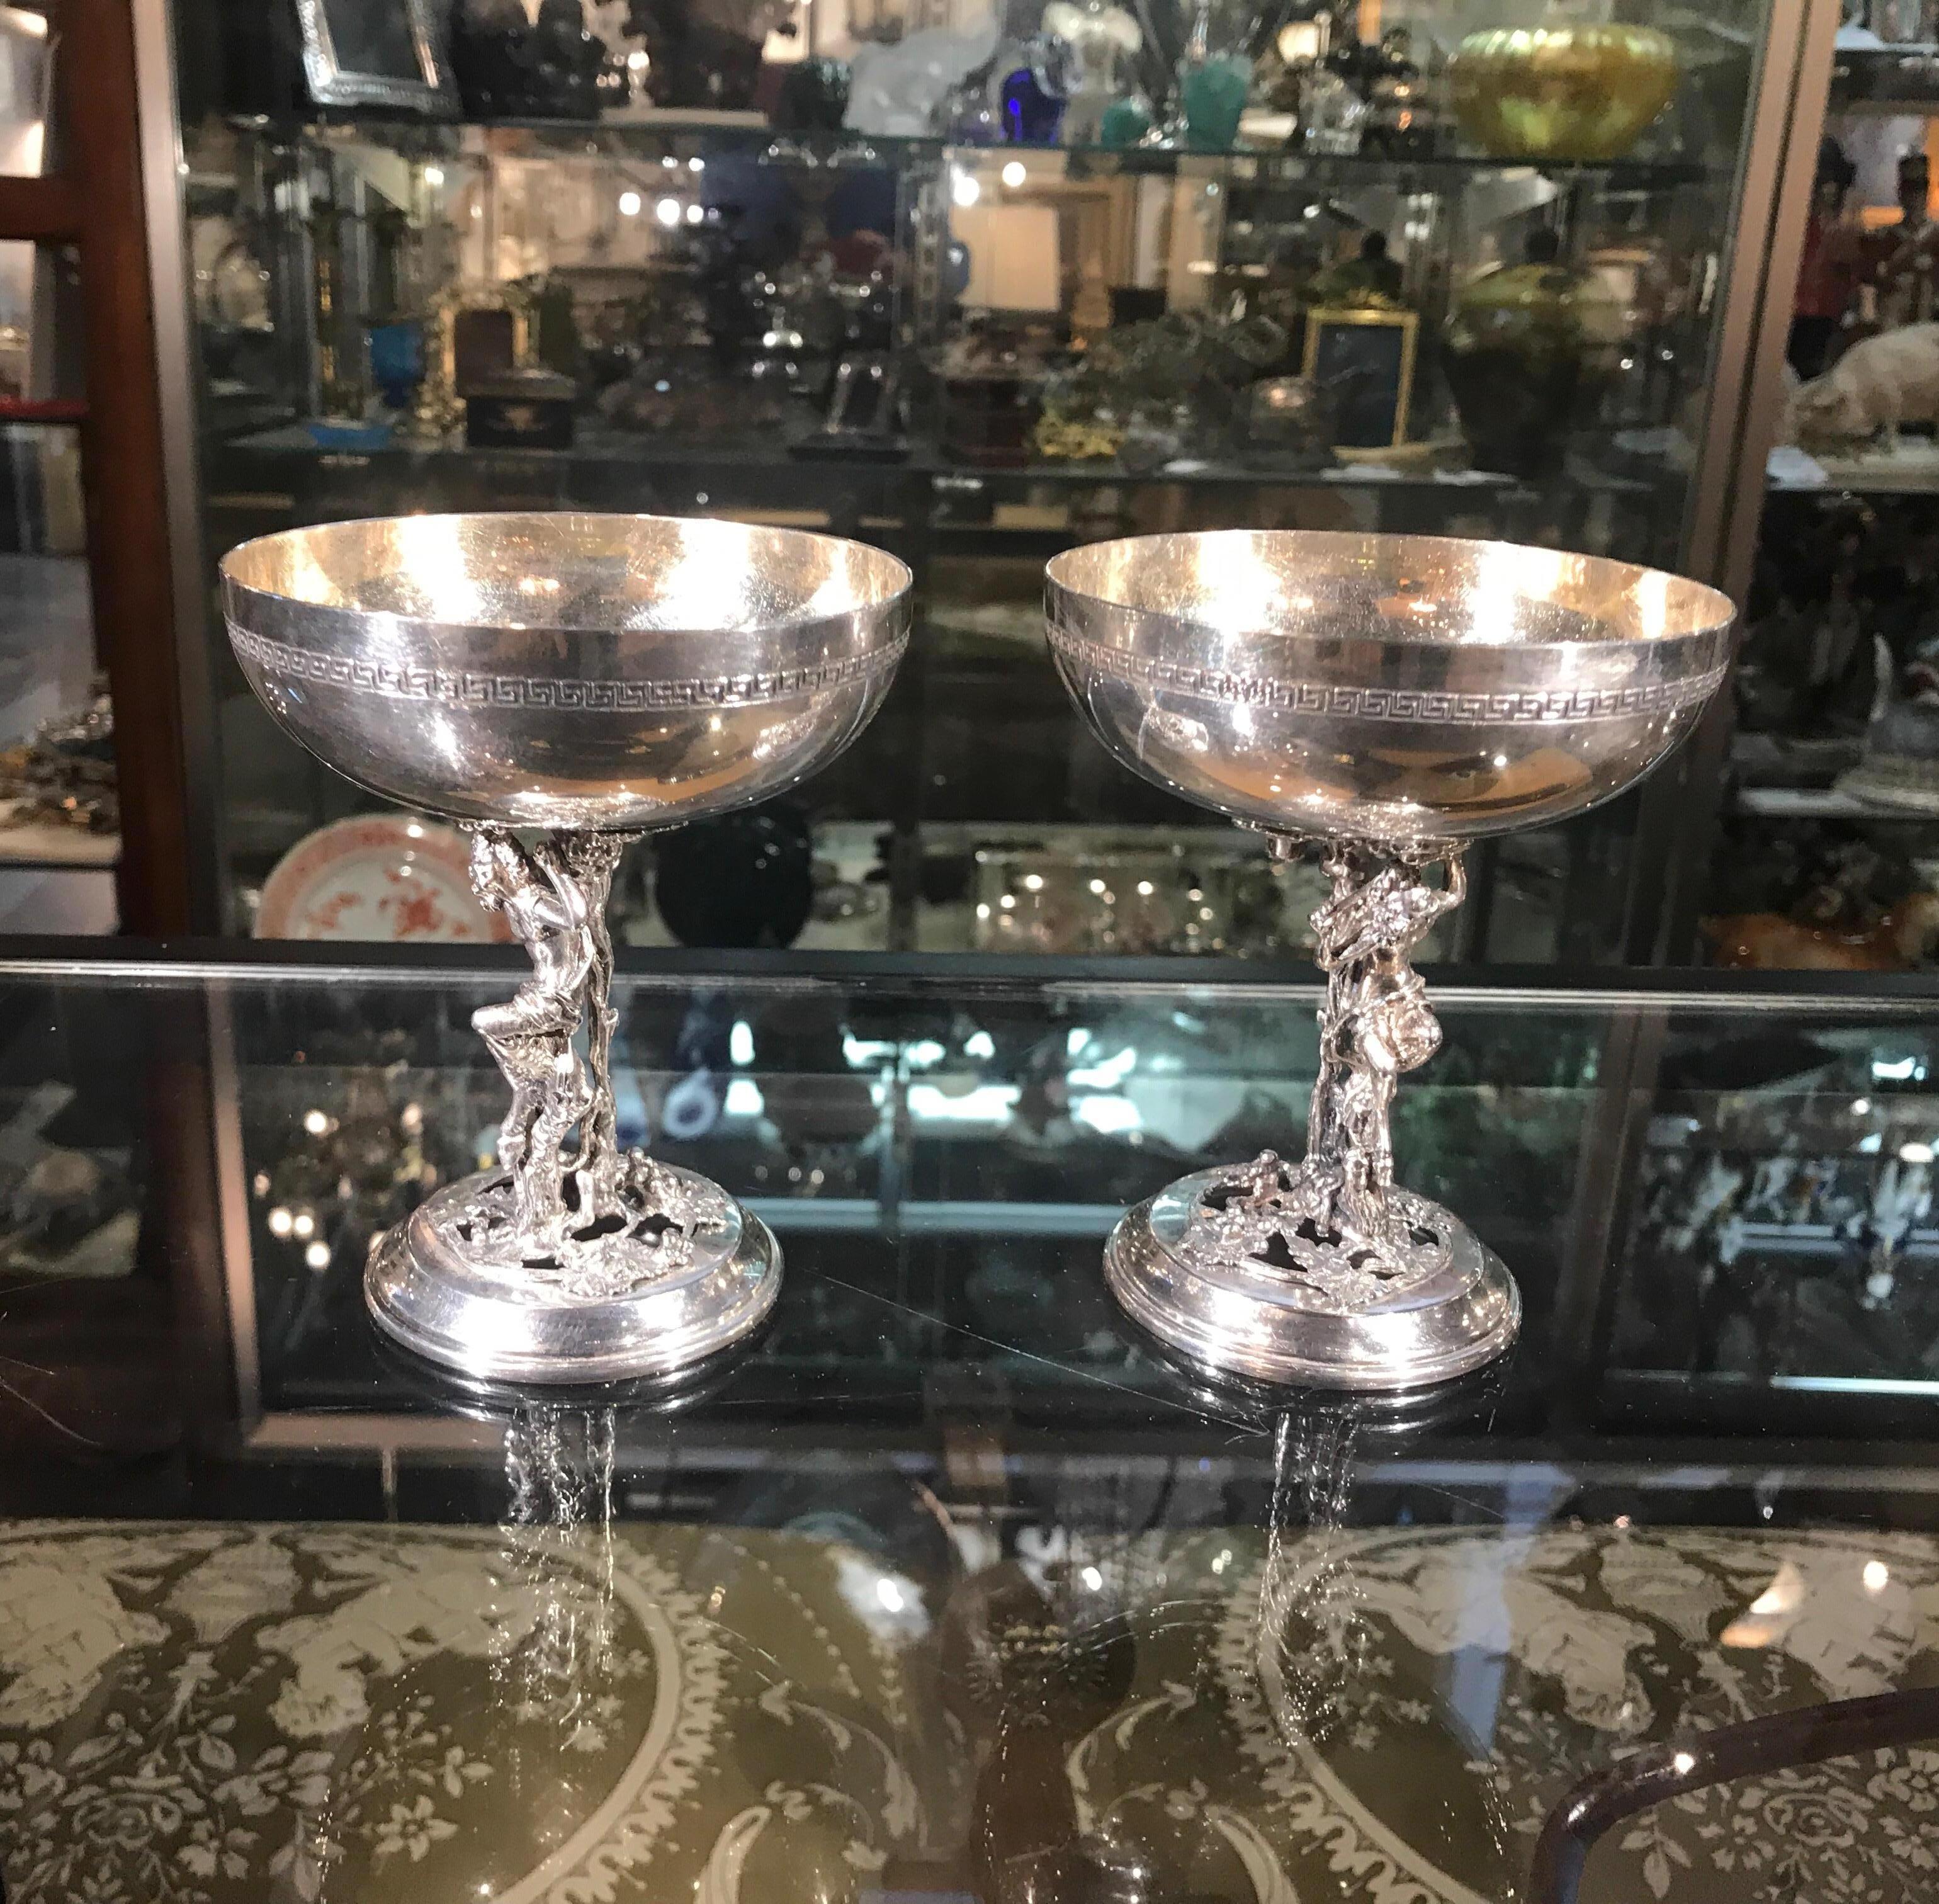 A pair of Bacchanalian motif champagne coups made in Spain. The bowl tops with Greek key pattern on the outside with a cast figure of Bacchus at the stem.